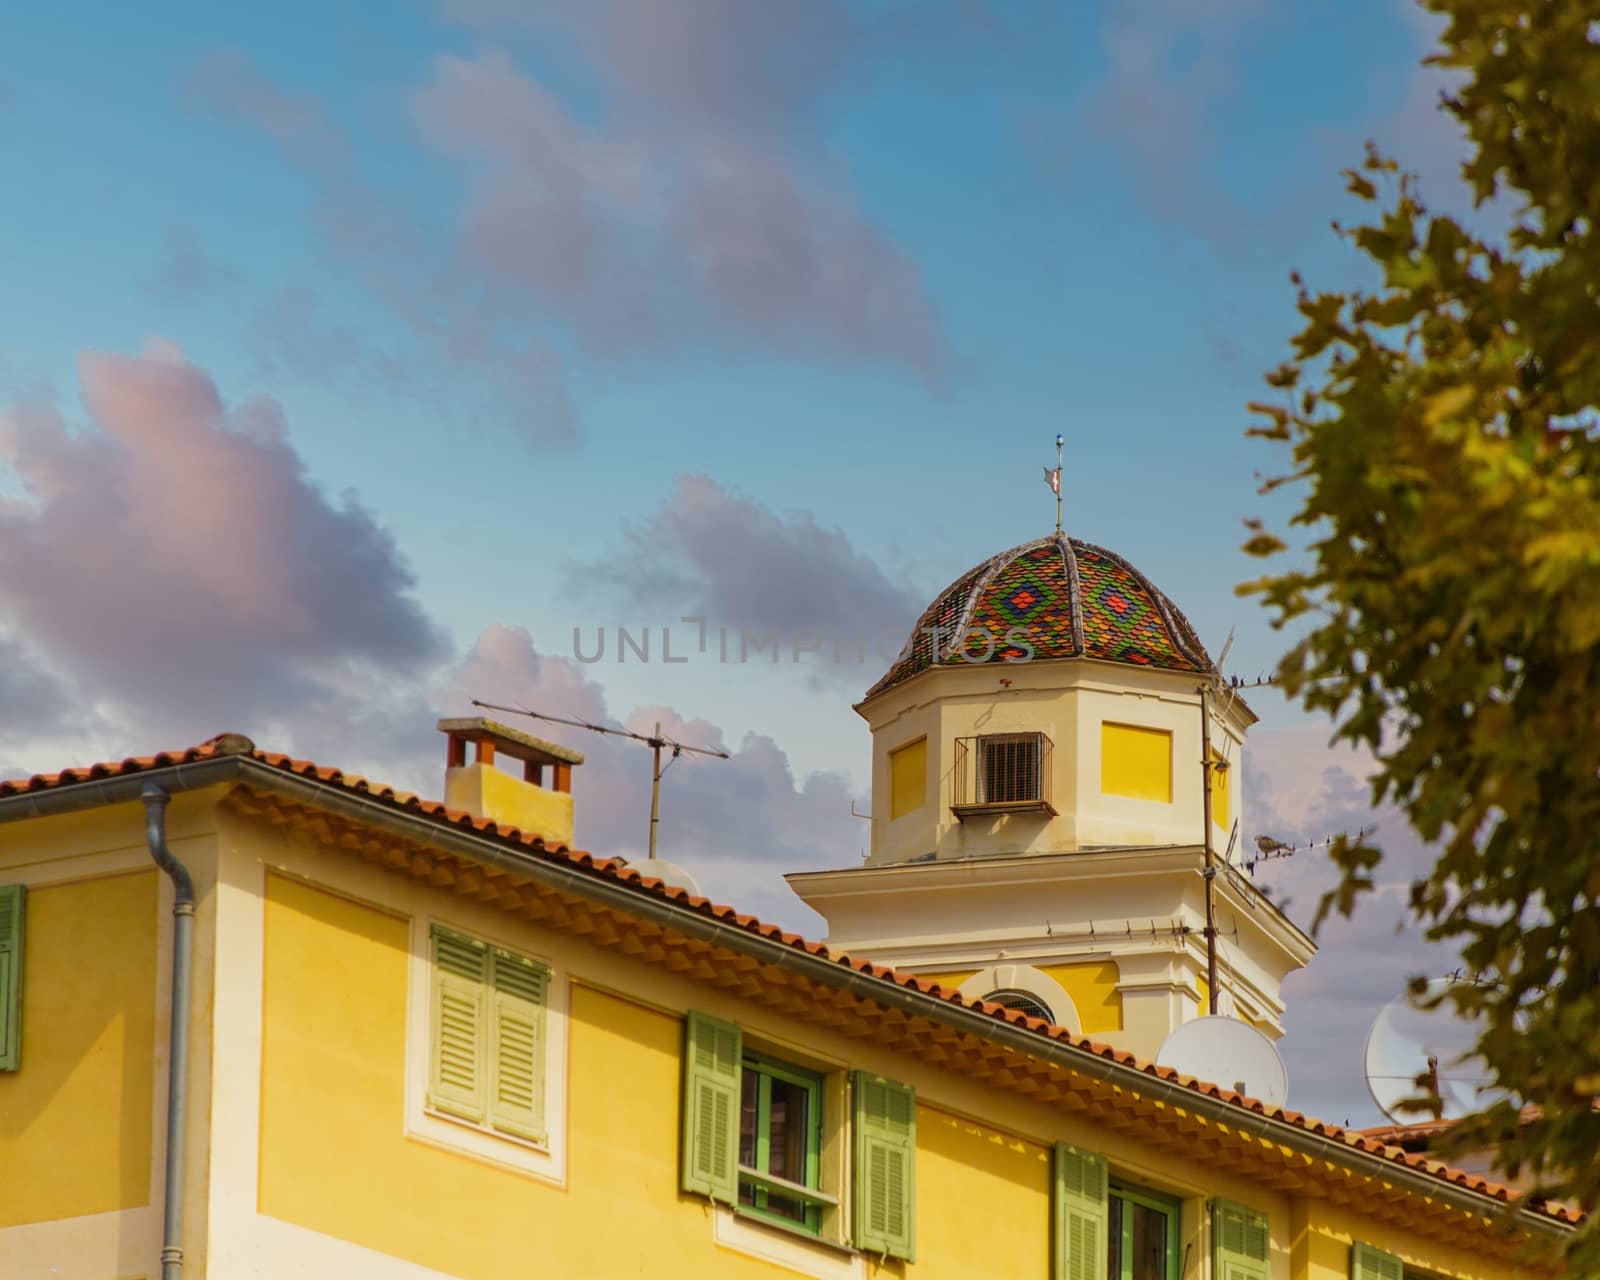 Colorful Rooftiles on Cupola at Dusk by dbvirago